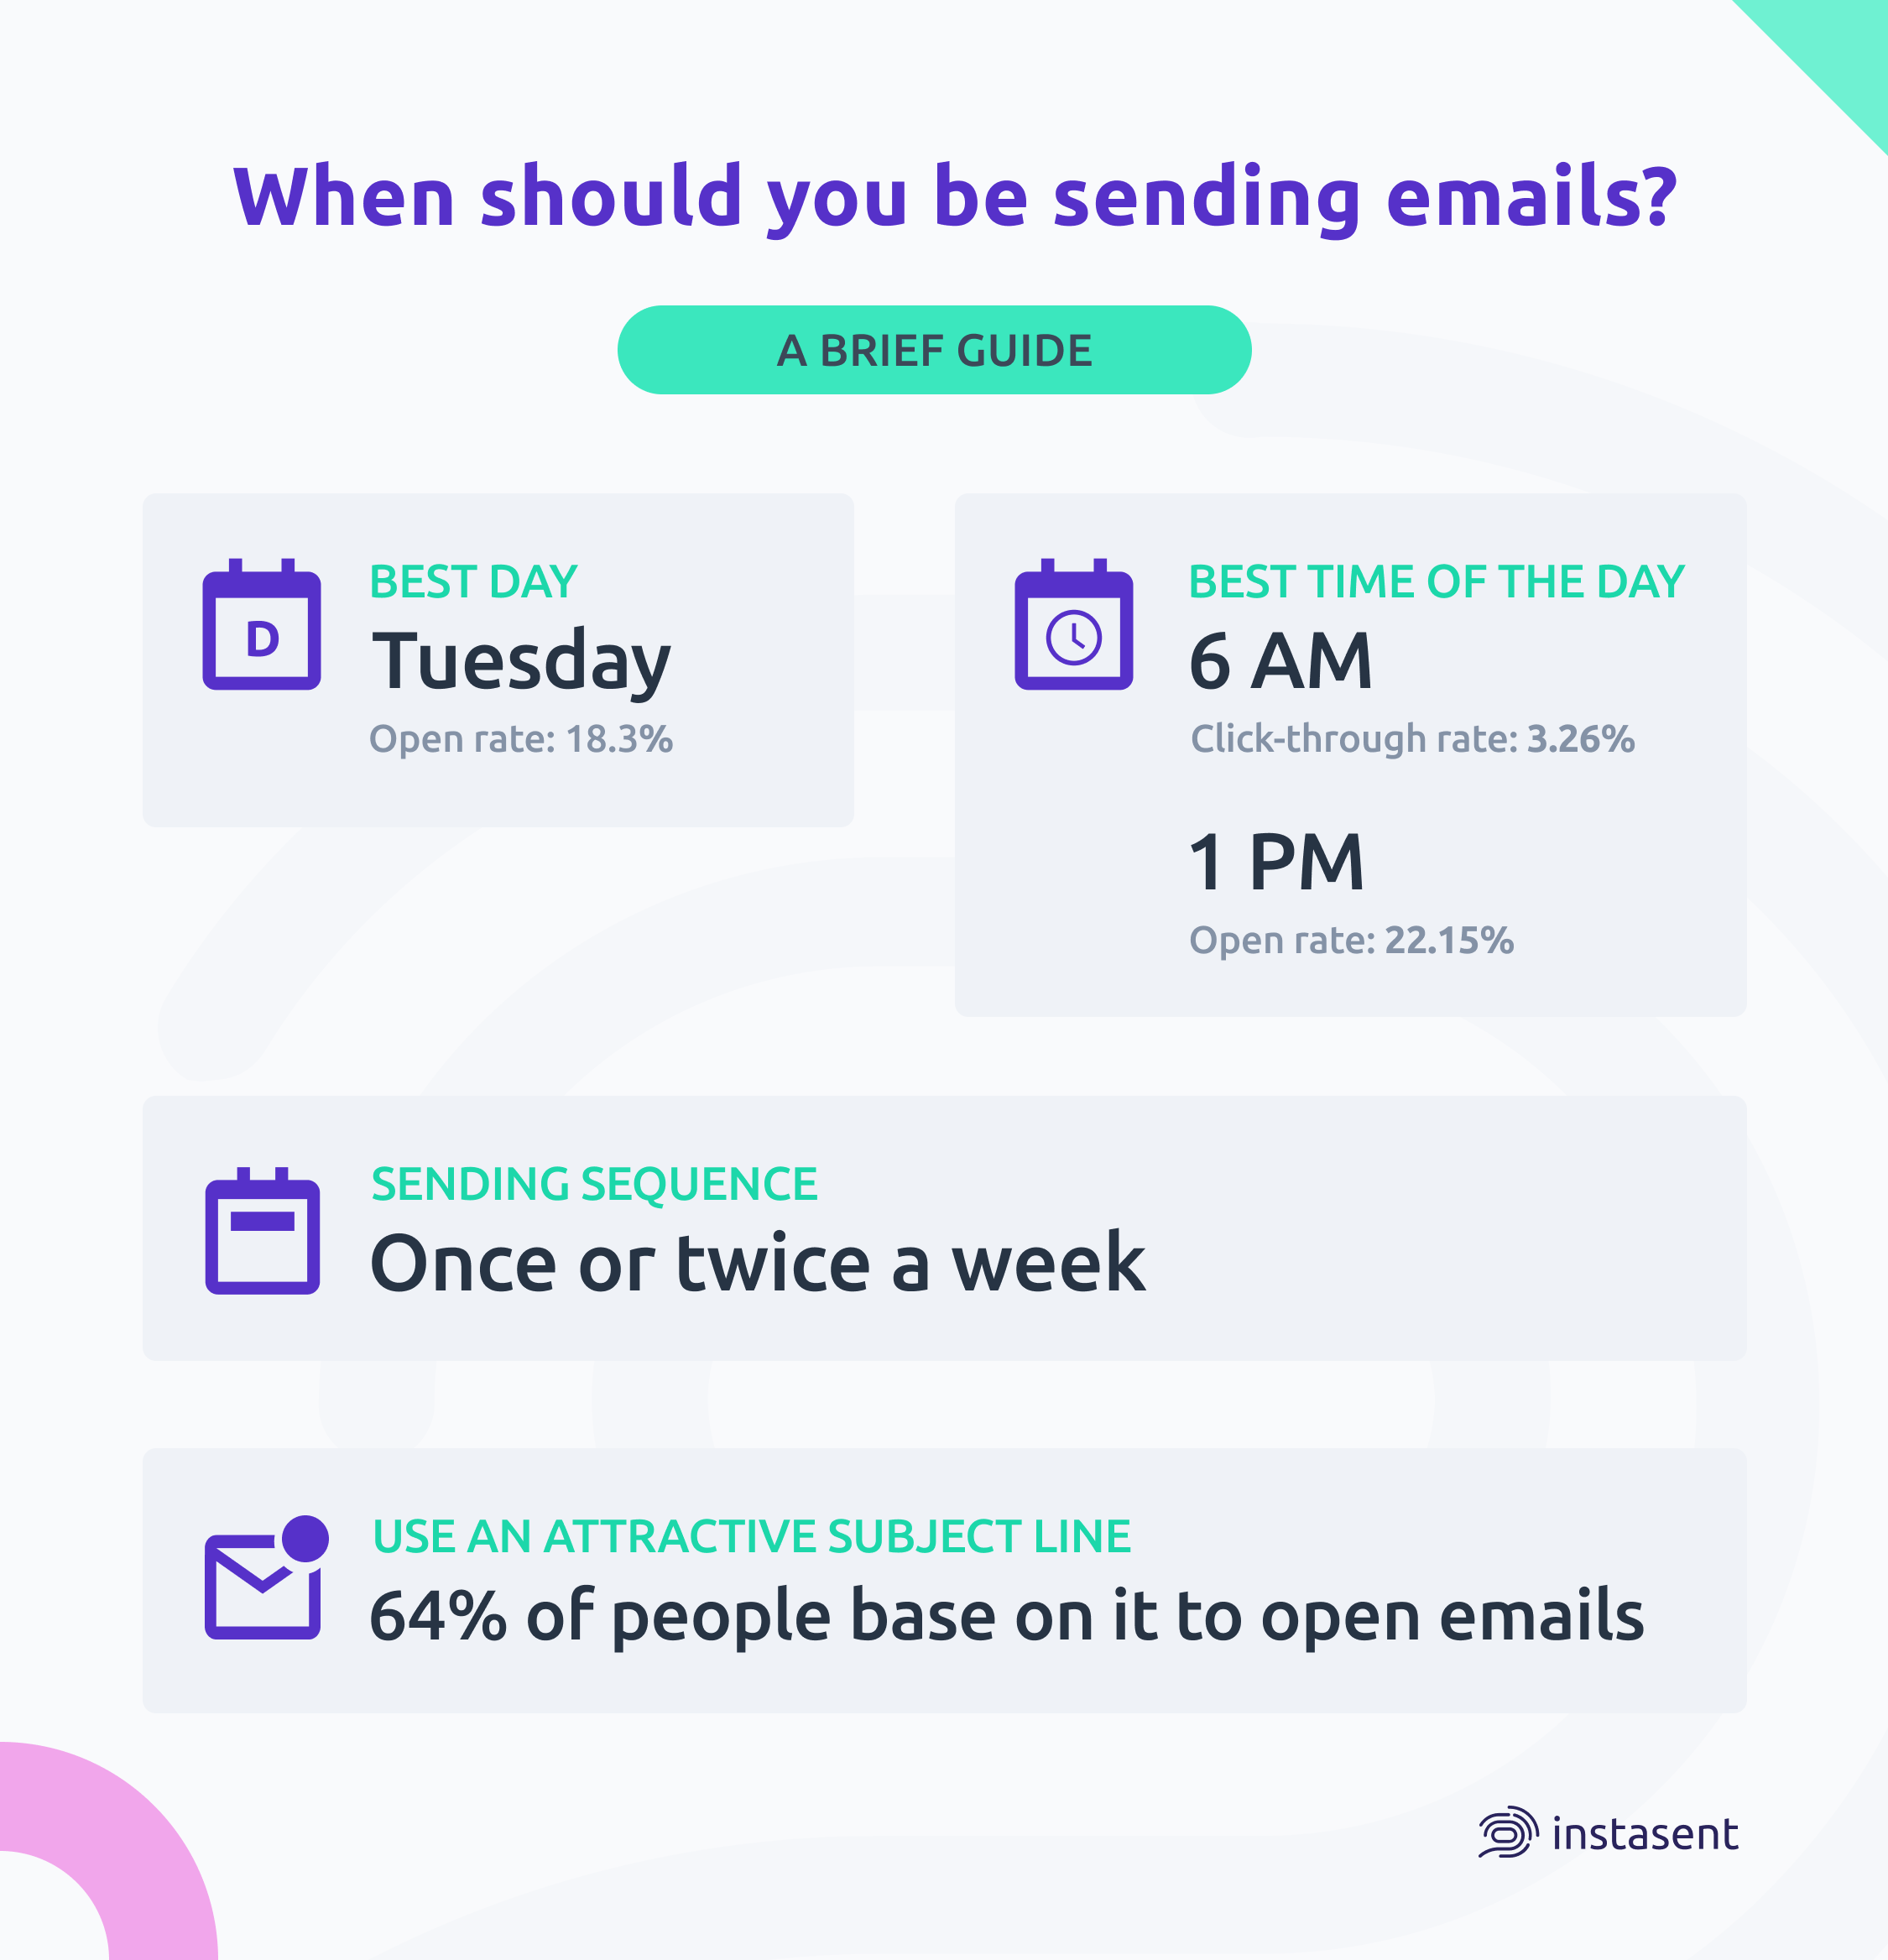 Guide summarizing best hours and days for sending emails